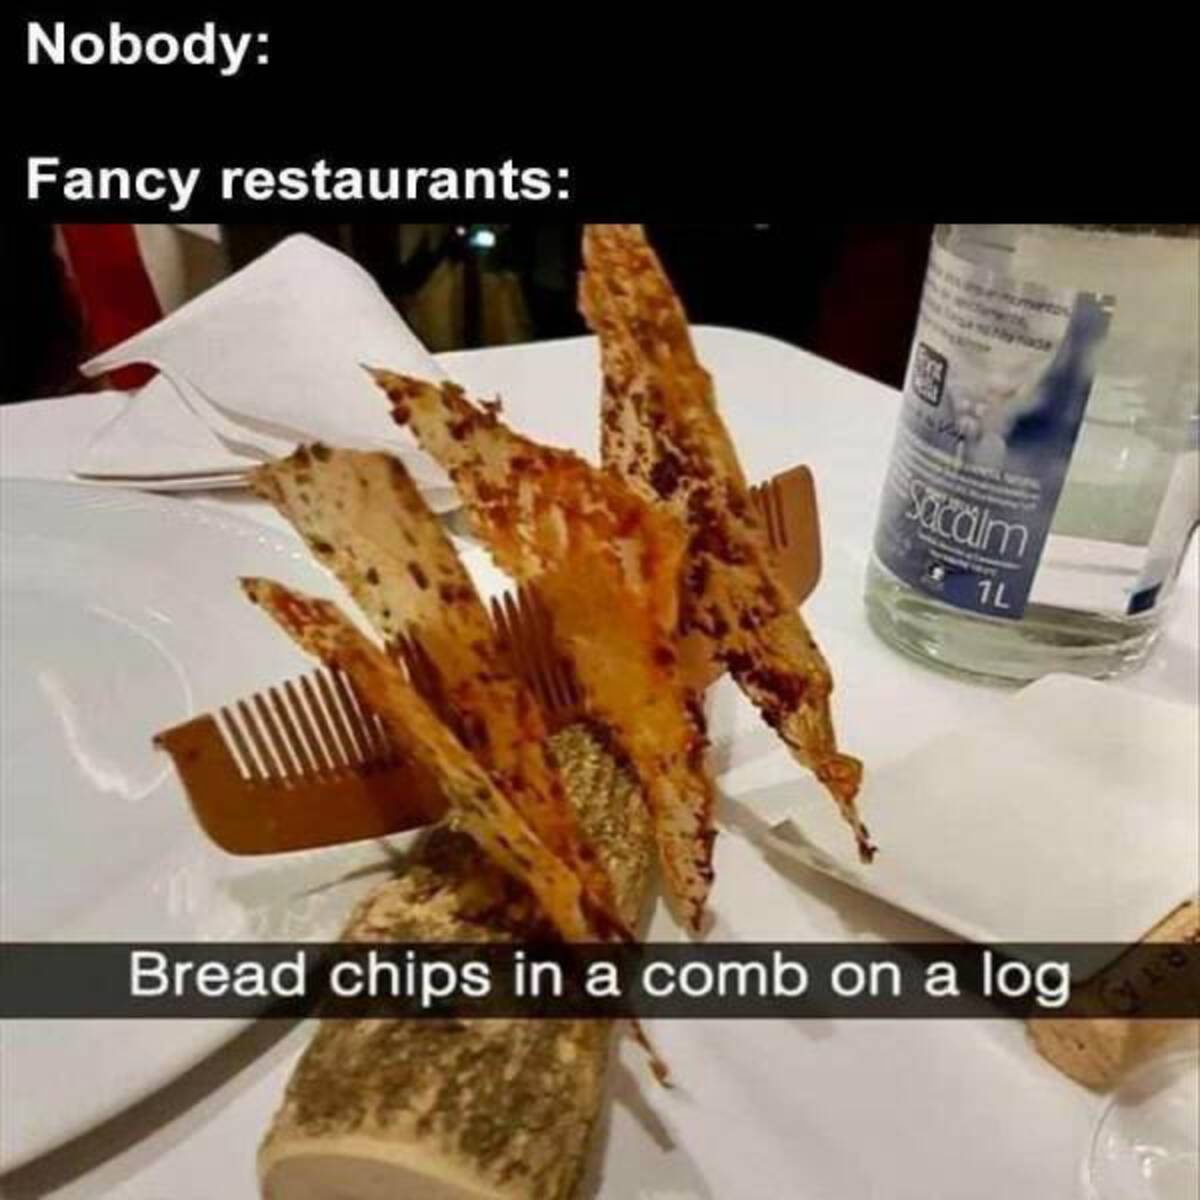 cursed food plating - Nobody Fancy restaurants Sacalm 1L Bread chips in a comb on a log 748